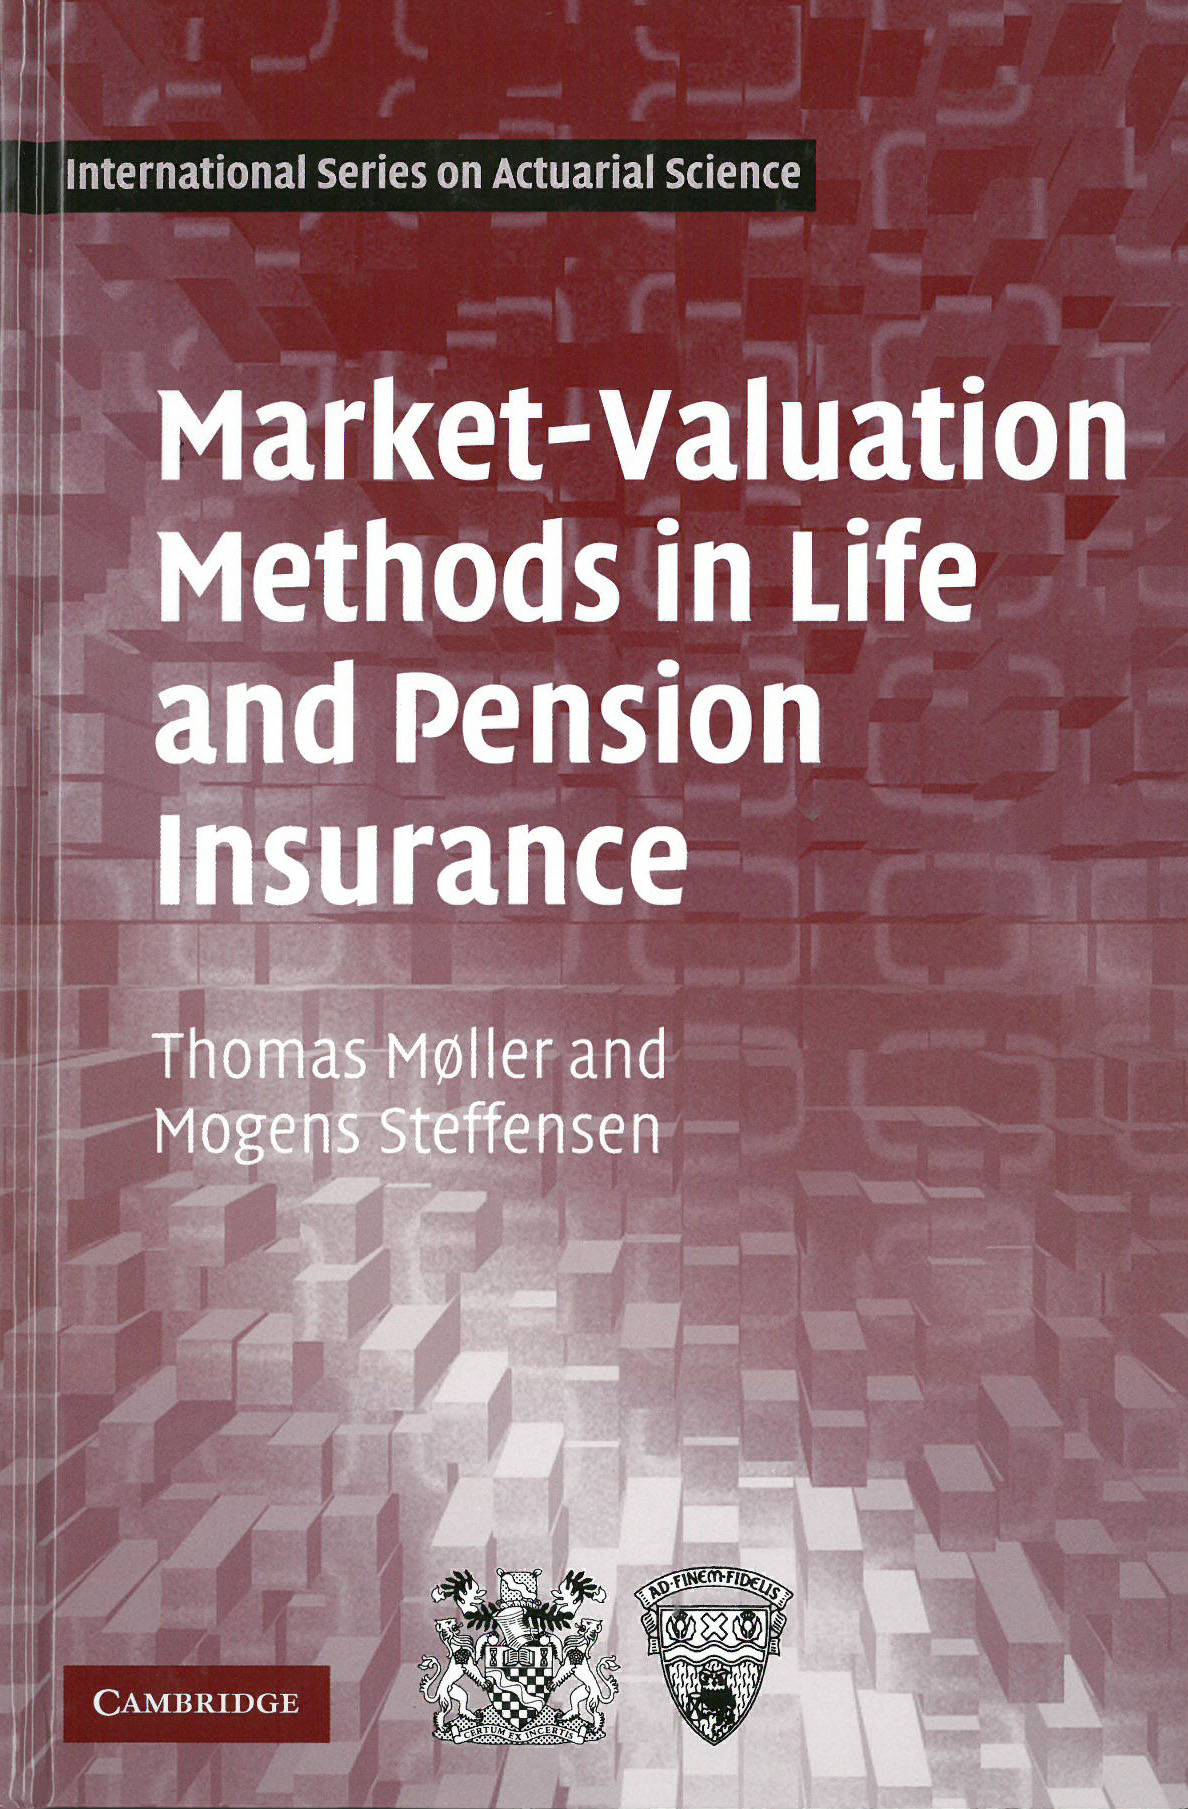 A generic image of Market-valuation methods in life and pension insurance publication